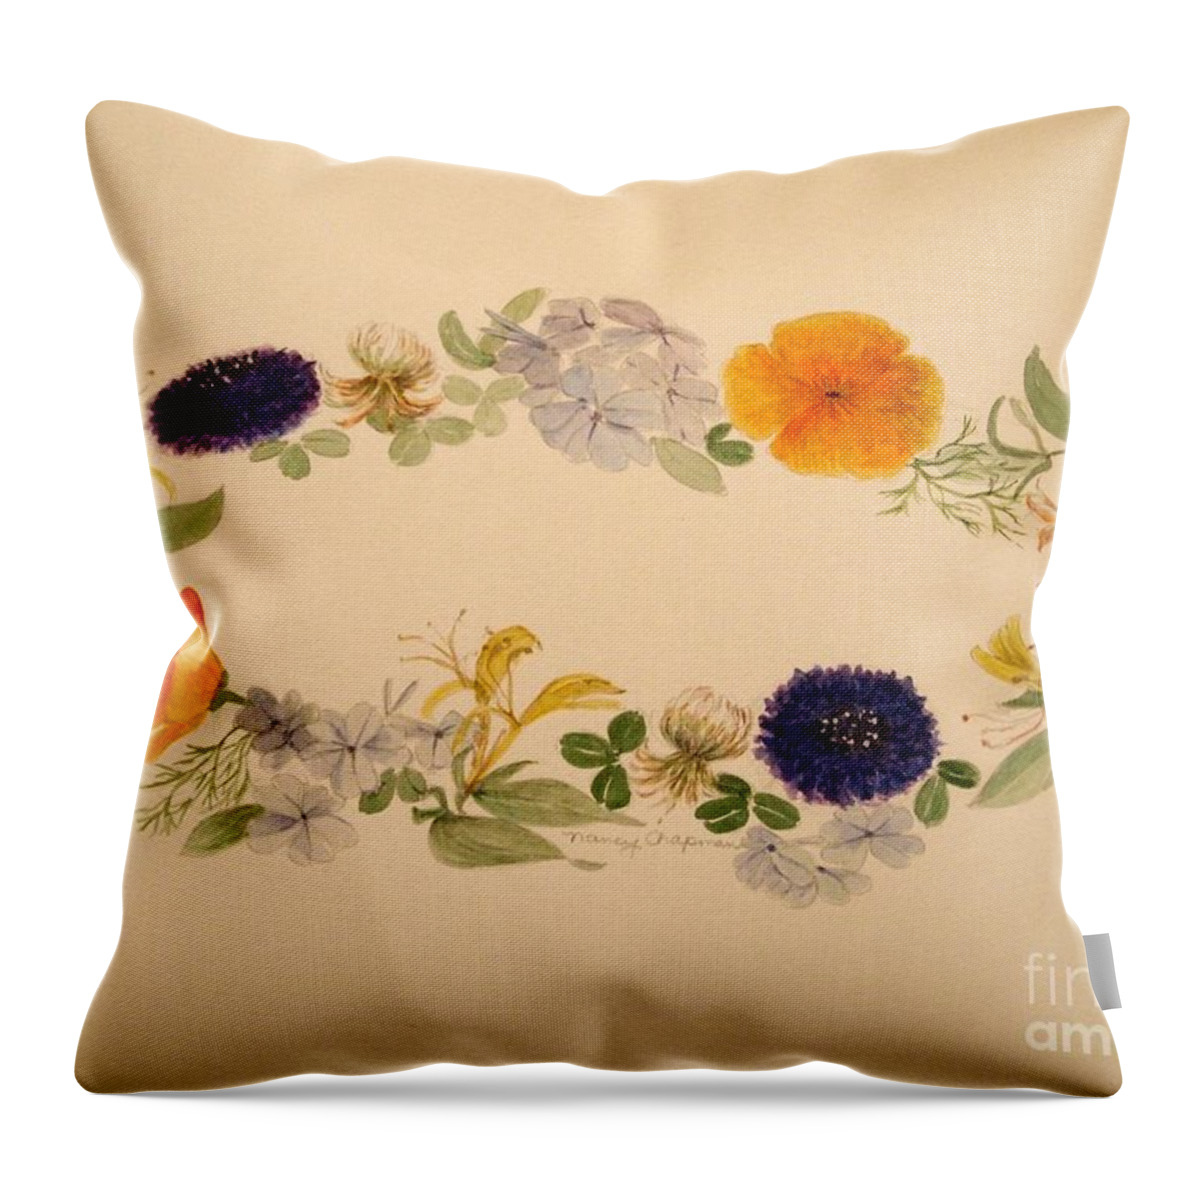 Watercolor Painting Throw Pillow featuring the painting A Flower Circle by Nancy Kane Chapman